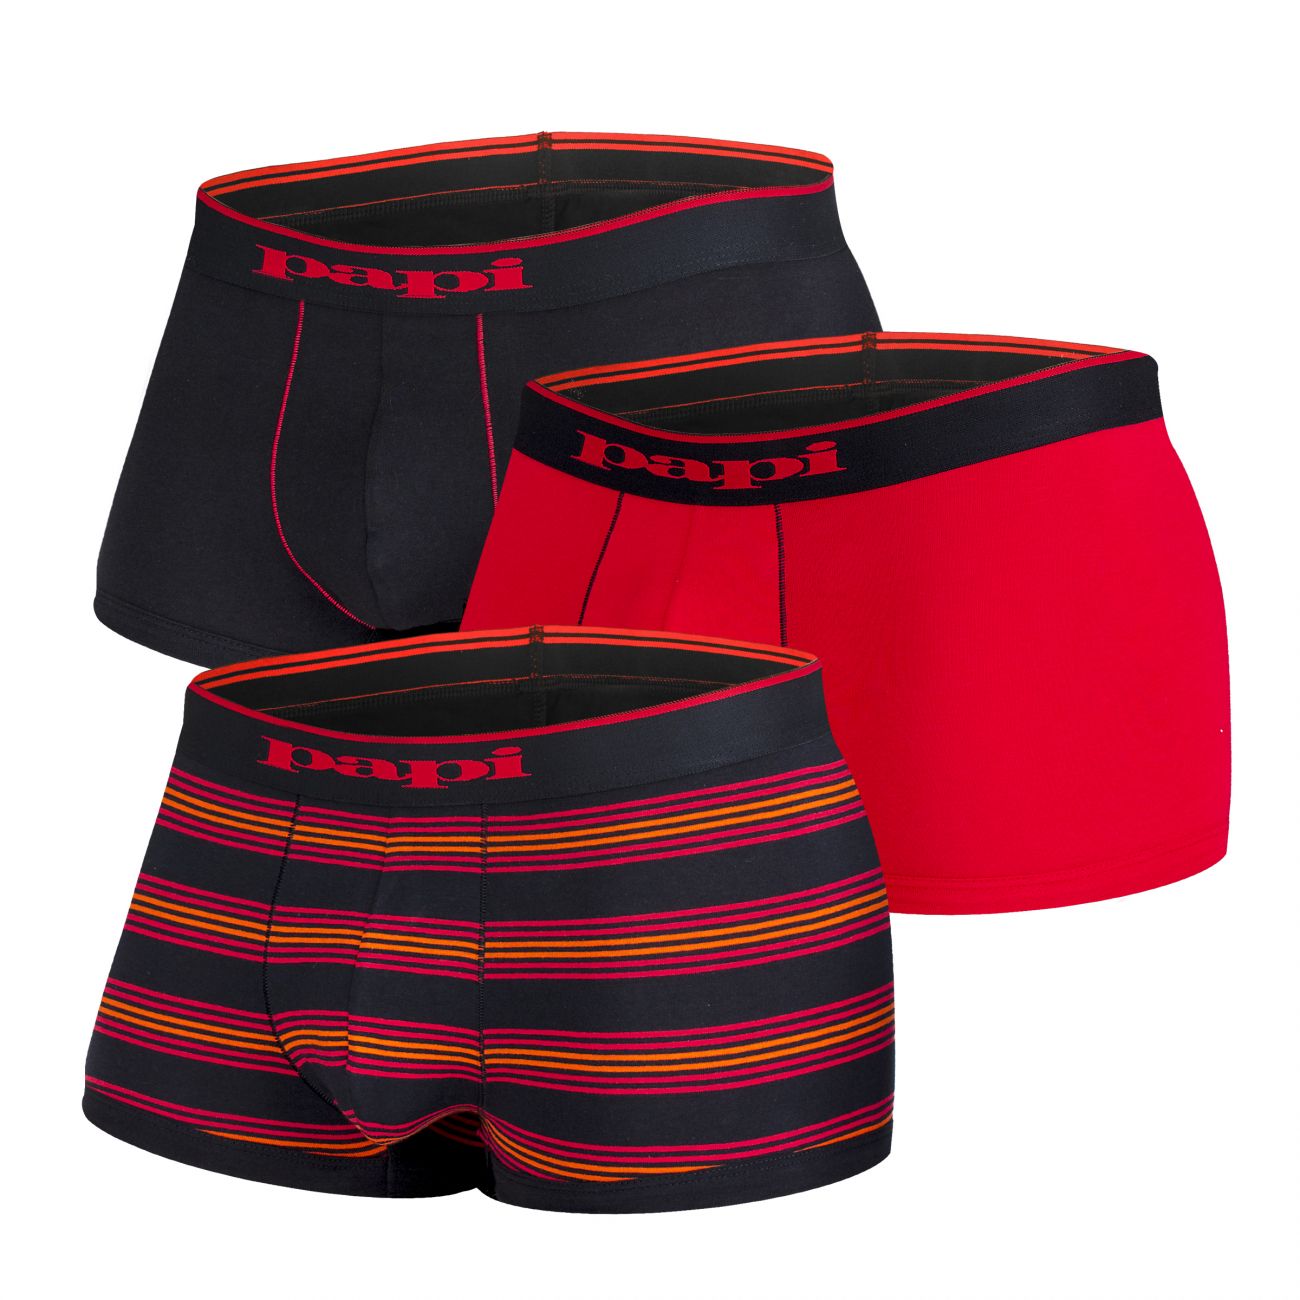  papi Stylish Brazilian Solid and Print Trunks (3-Pack